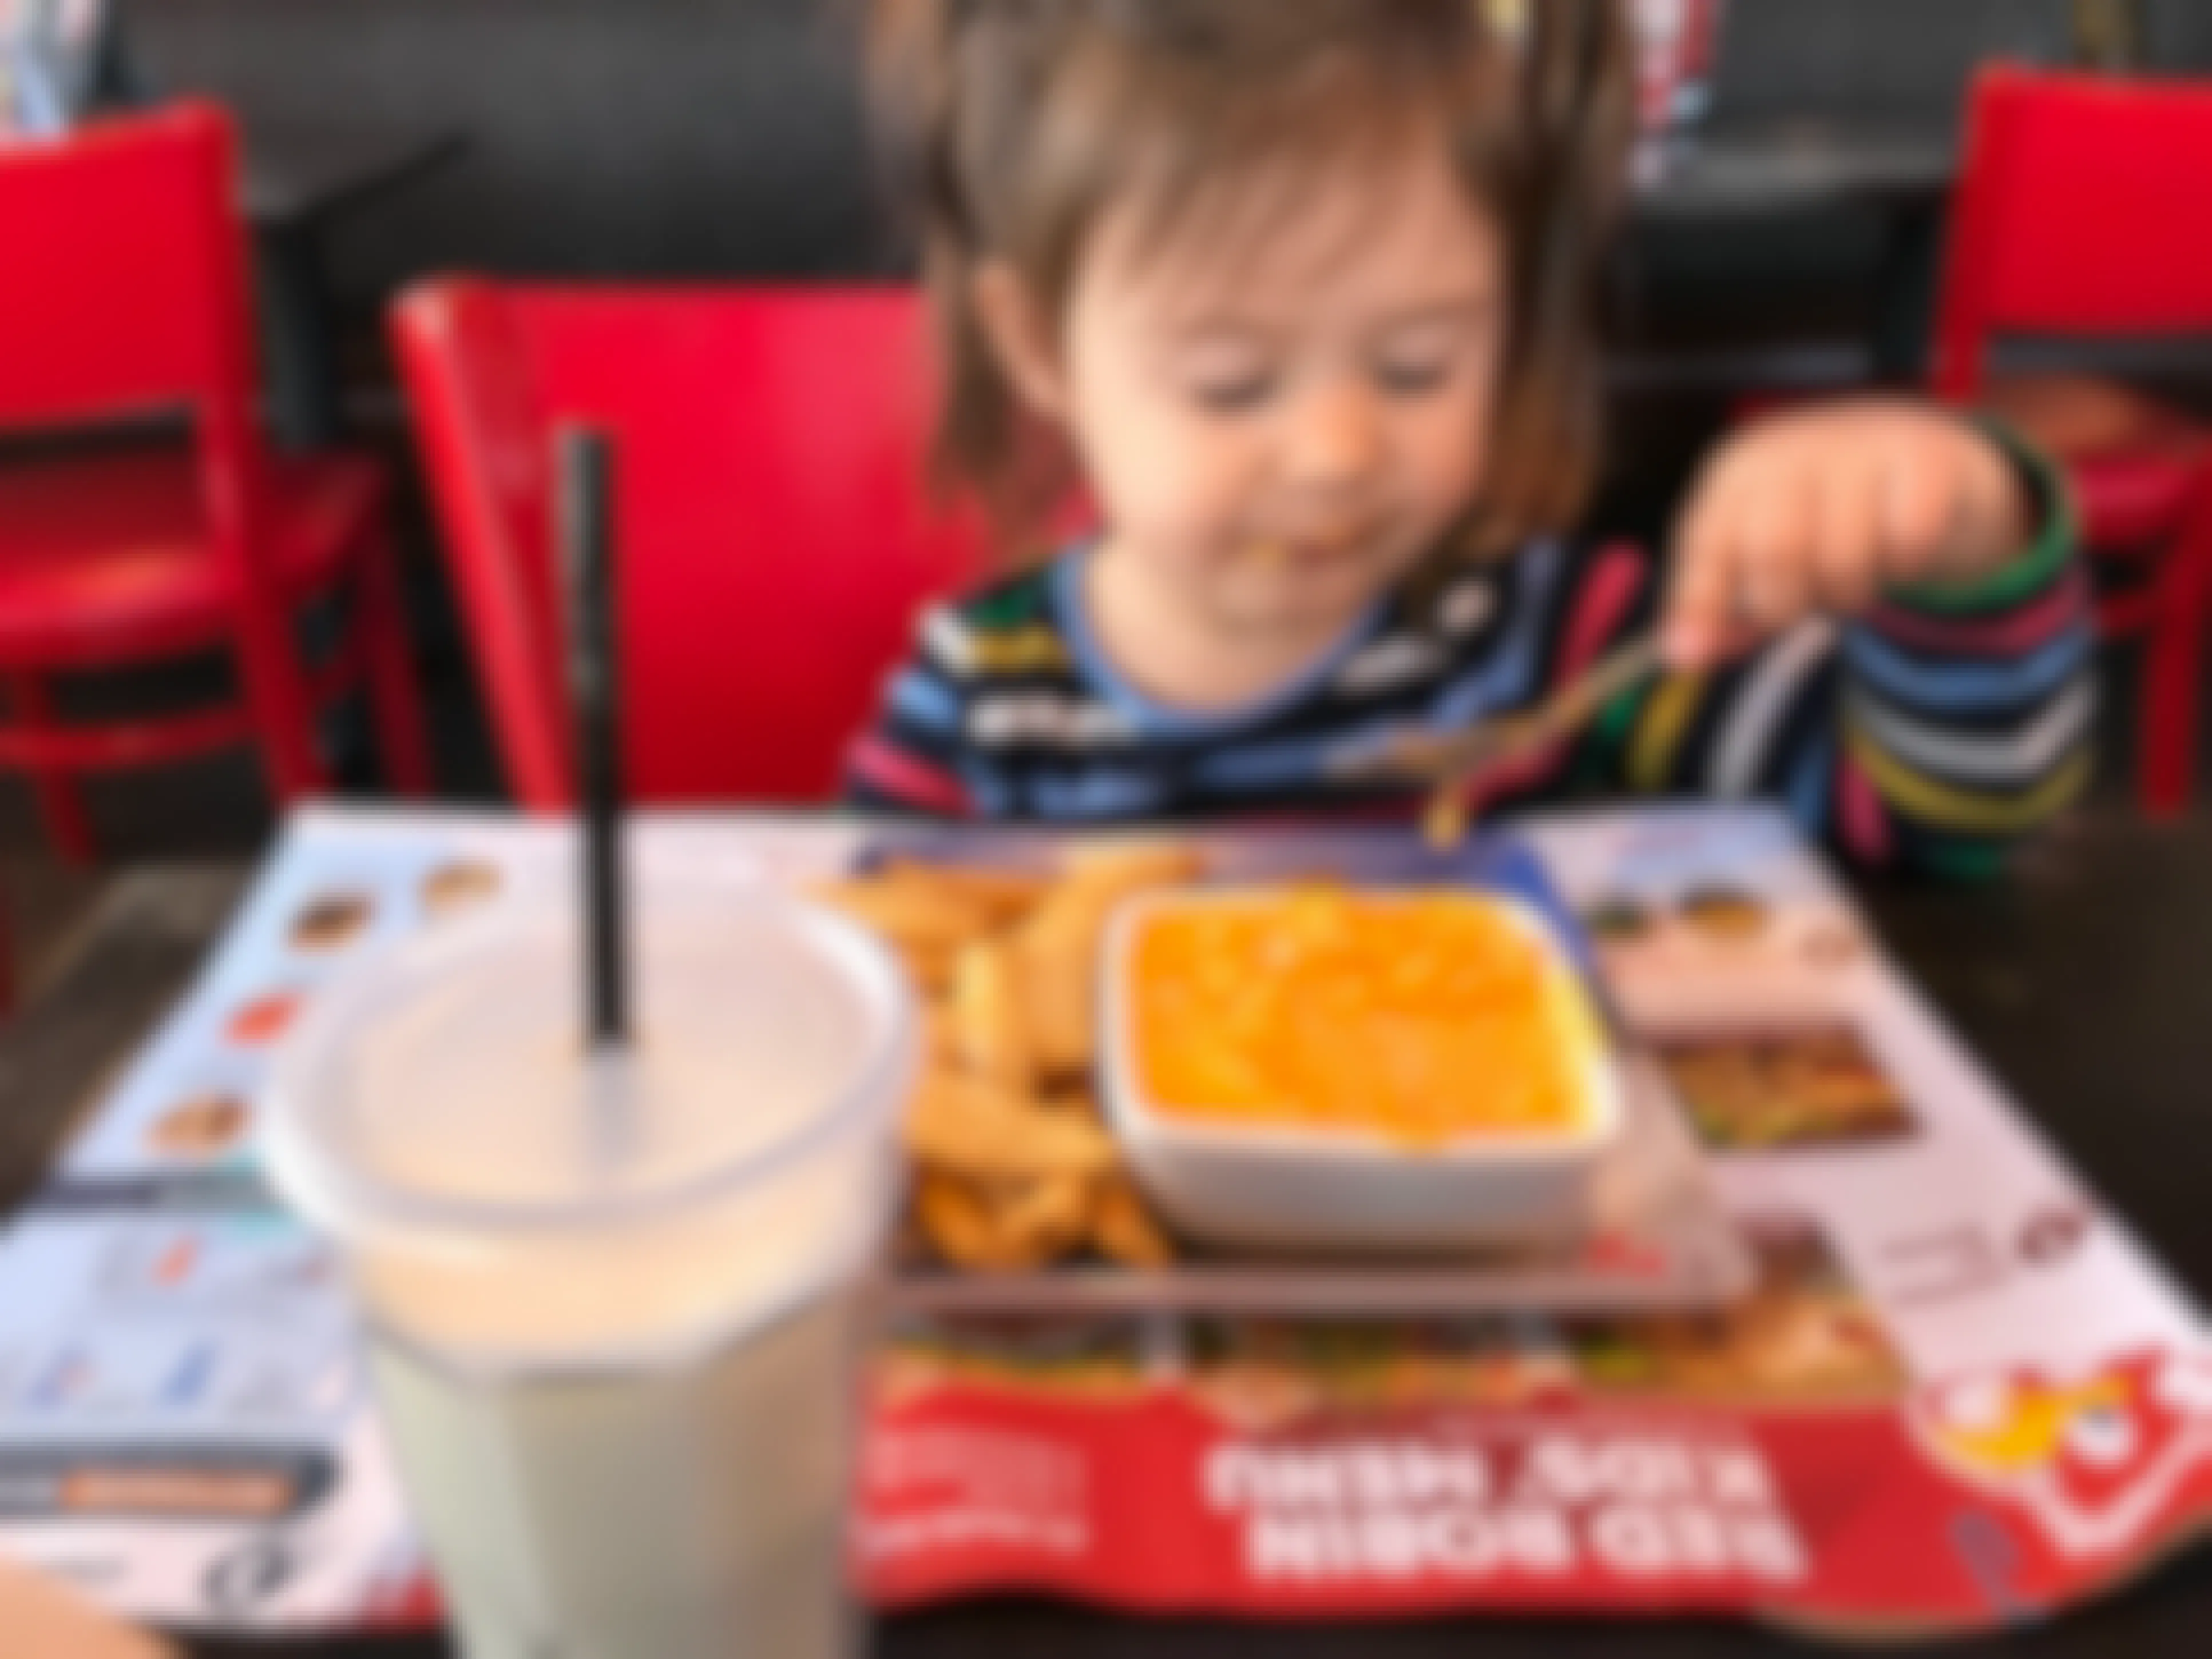 A child sitting at a table at Red Robin, using a spoon to eat mac and cheese. On the table there is a kids' menu spread out and a milkshake.